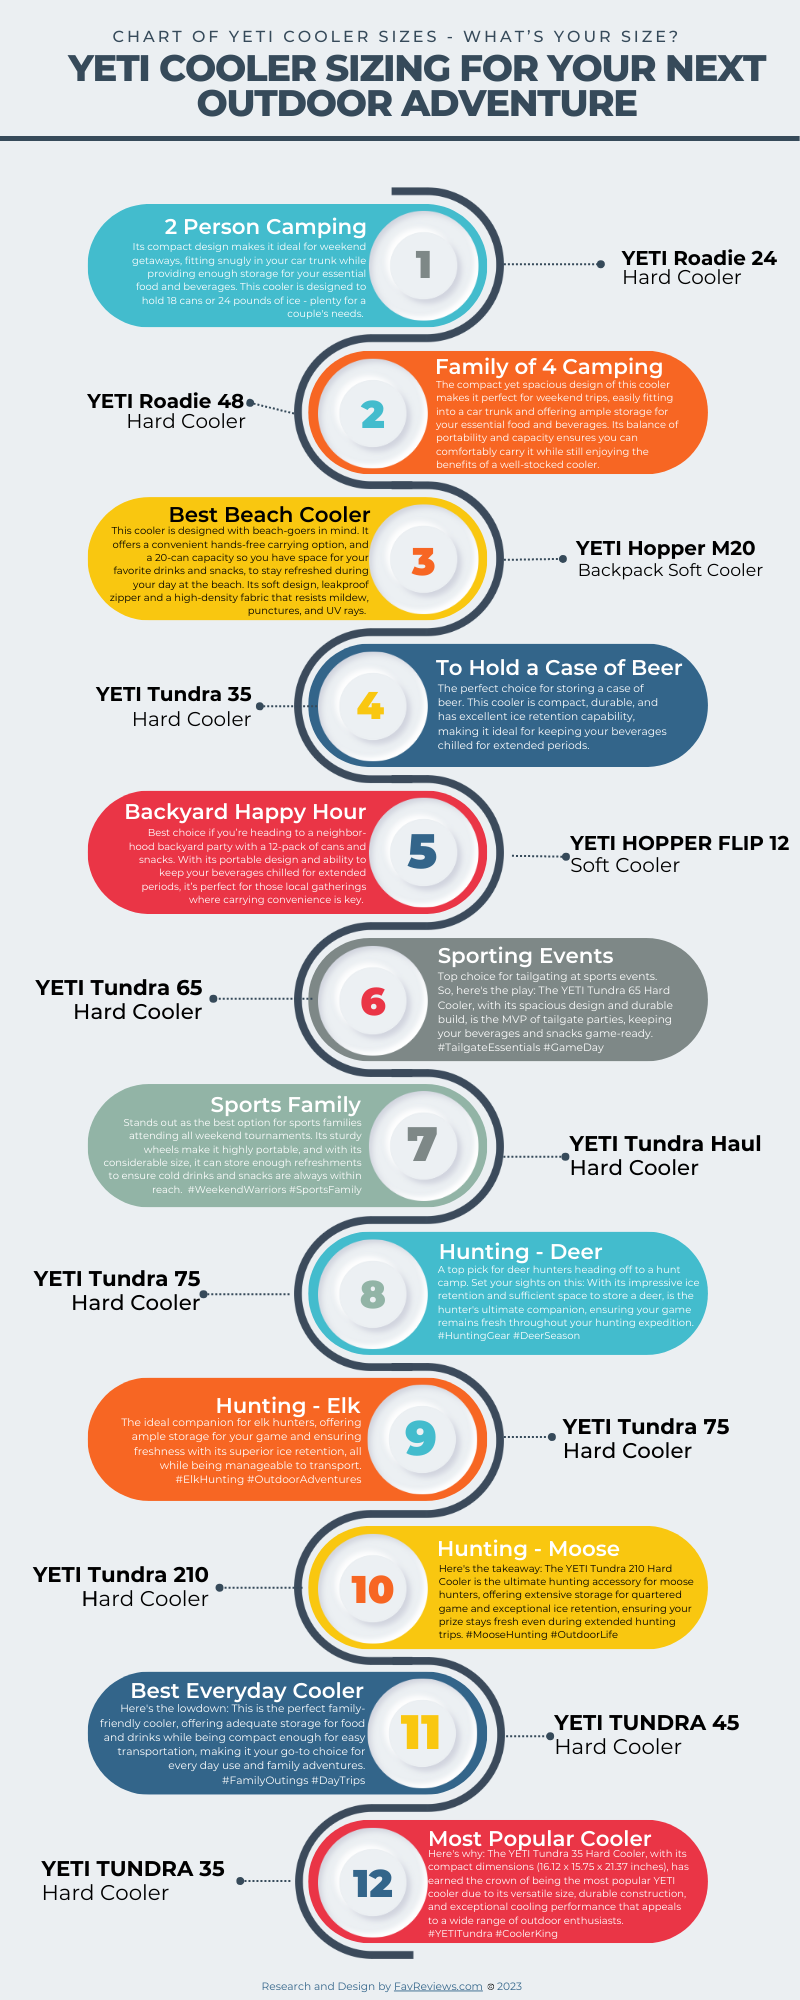  Infographic by FAV Reviews BEST YETI COOLER SIZES BY ACTIVITY